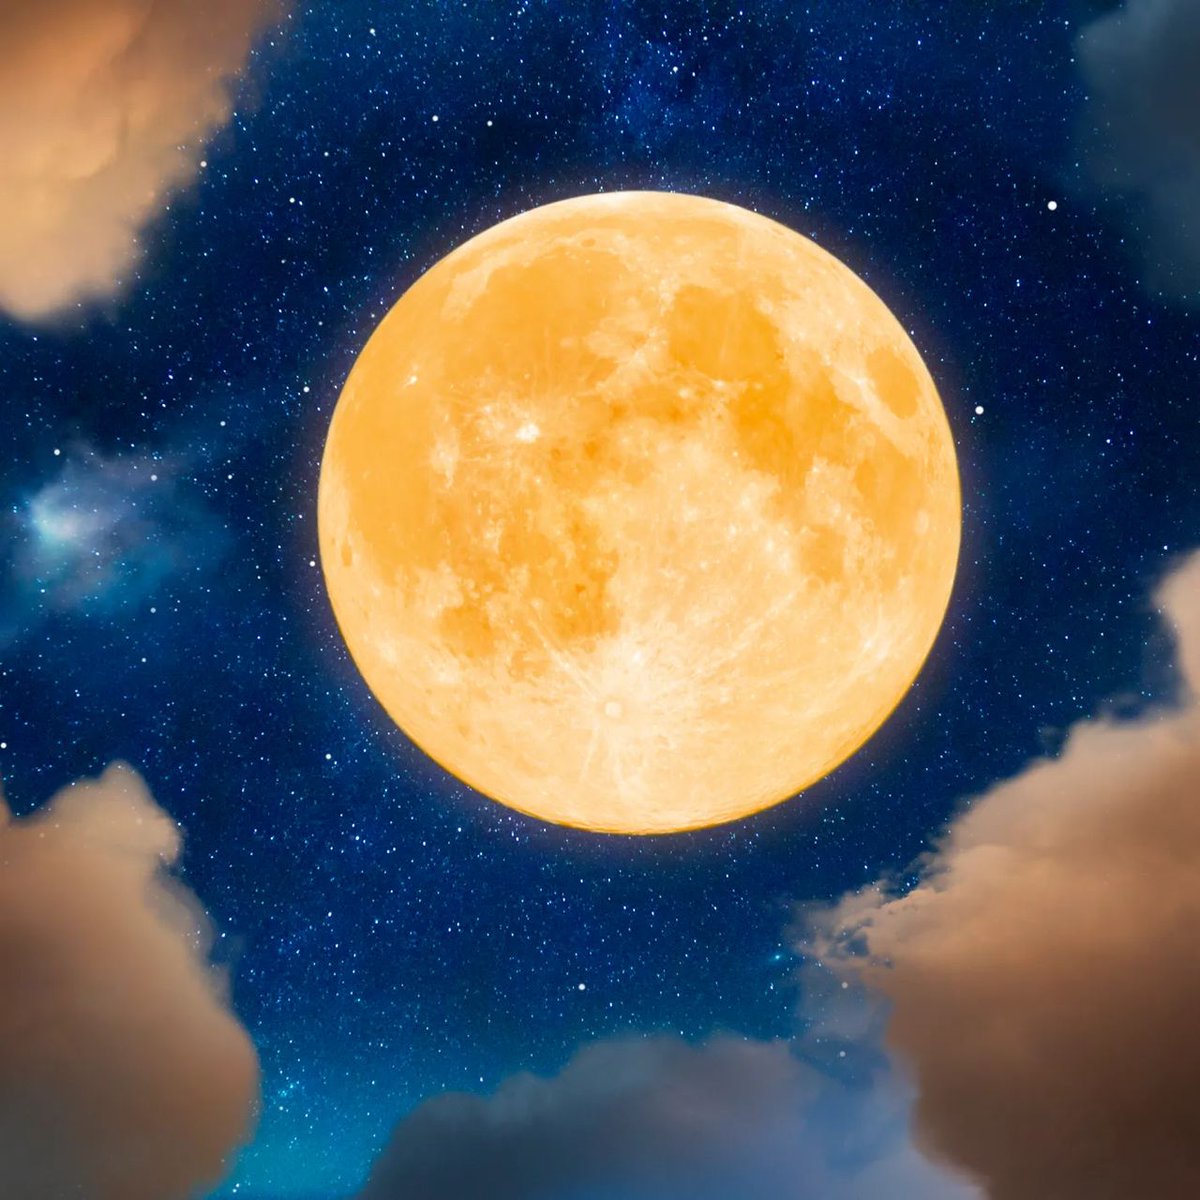 Please start preparing for the ritual set for Tuesday, April 23rd, on the full moon day. Remember to stay engaged by subscribing, liking, sharing, tagging and commenting. Tuesday: 23rd of April is a Full Moon day youtube.com/@transformatio… #fullmoon #tuesday #getready #rituals